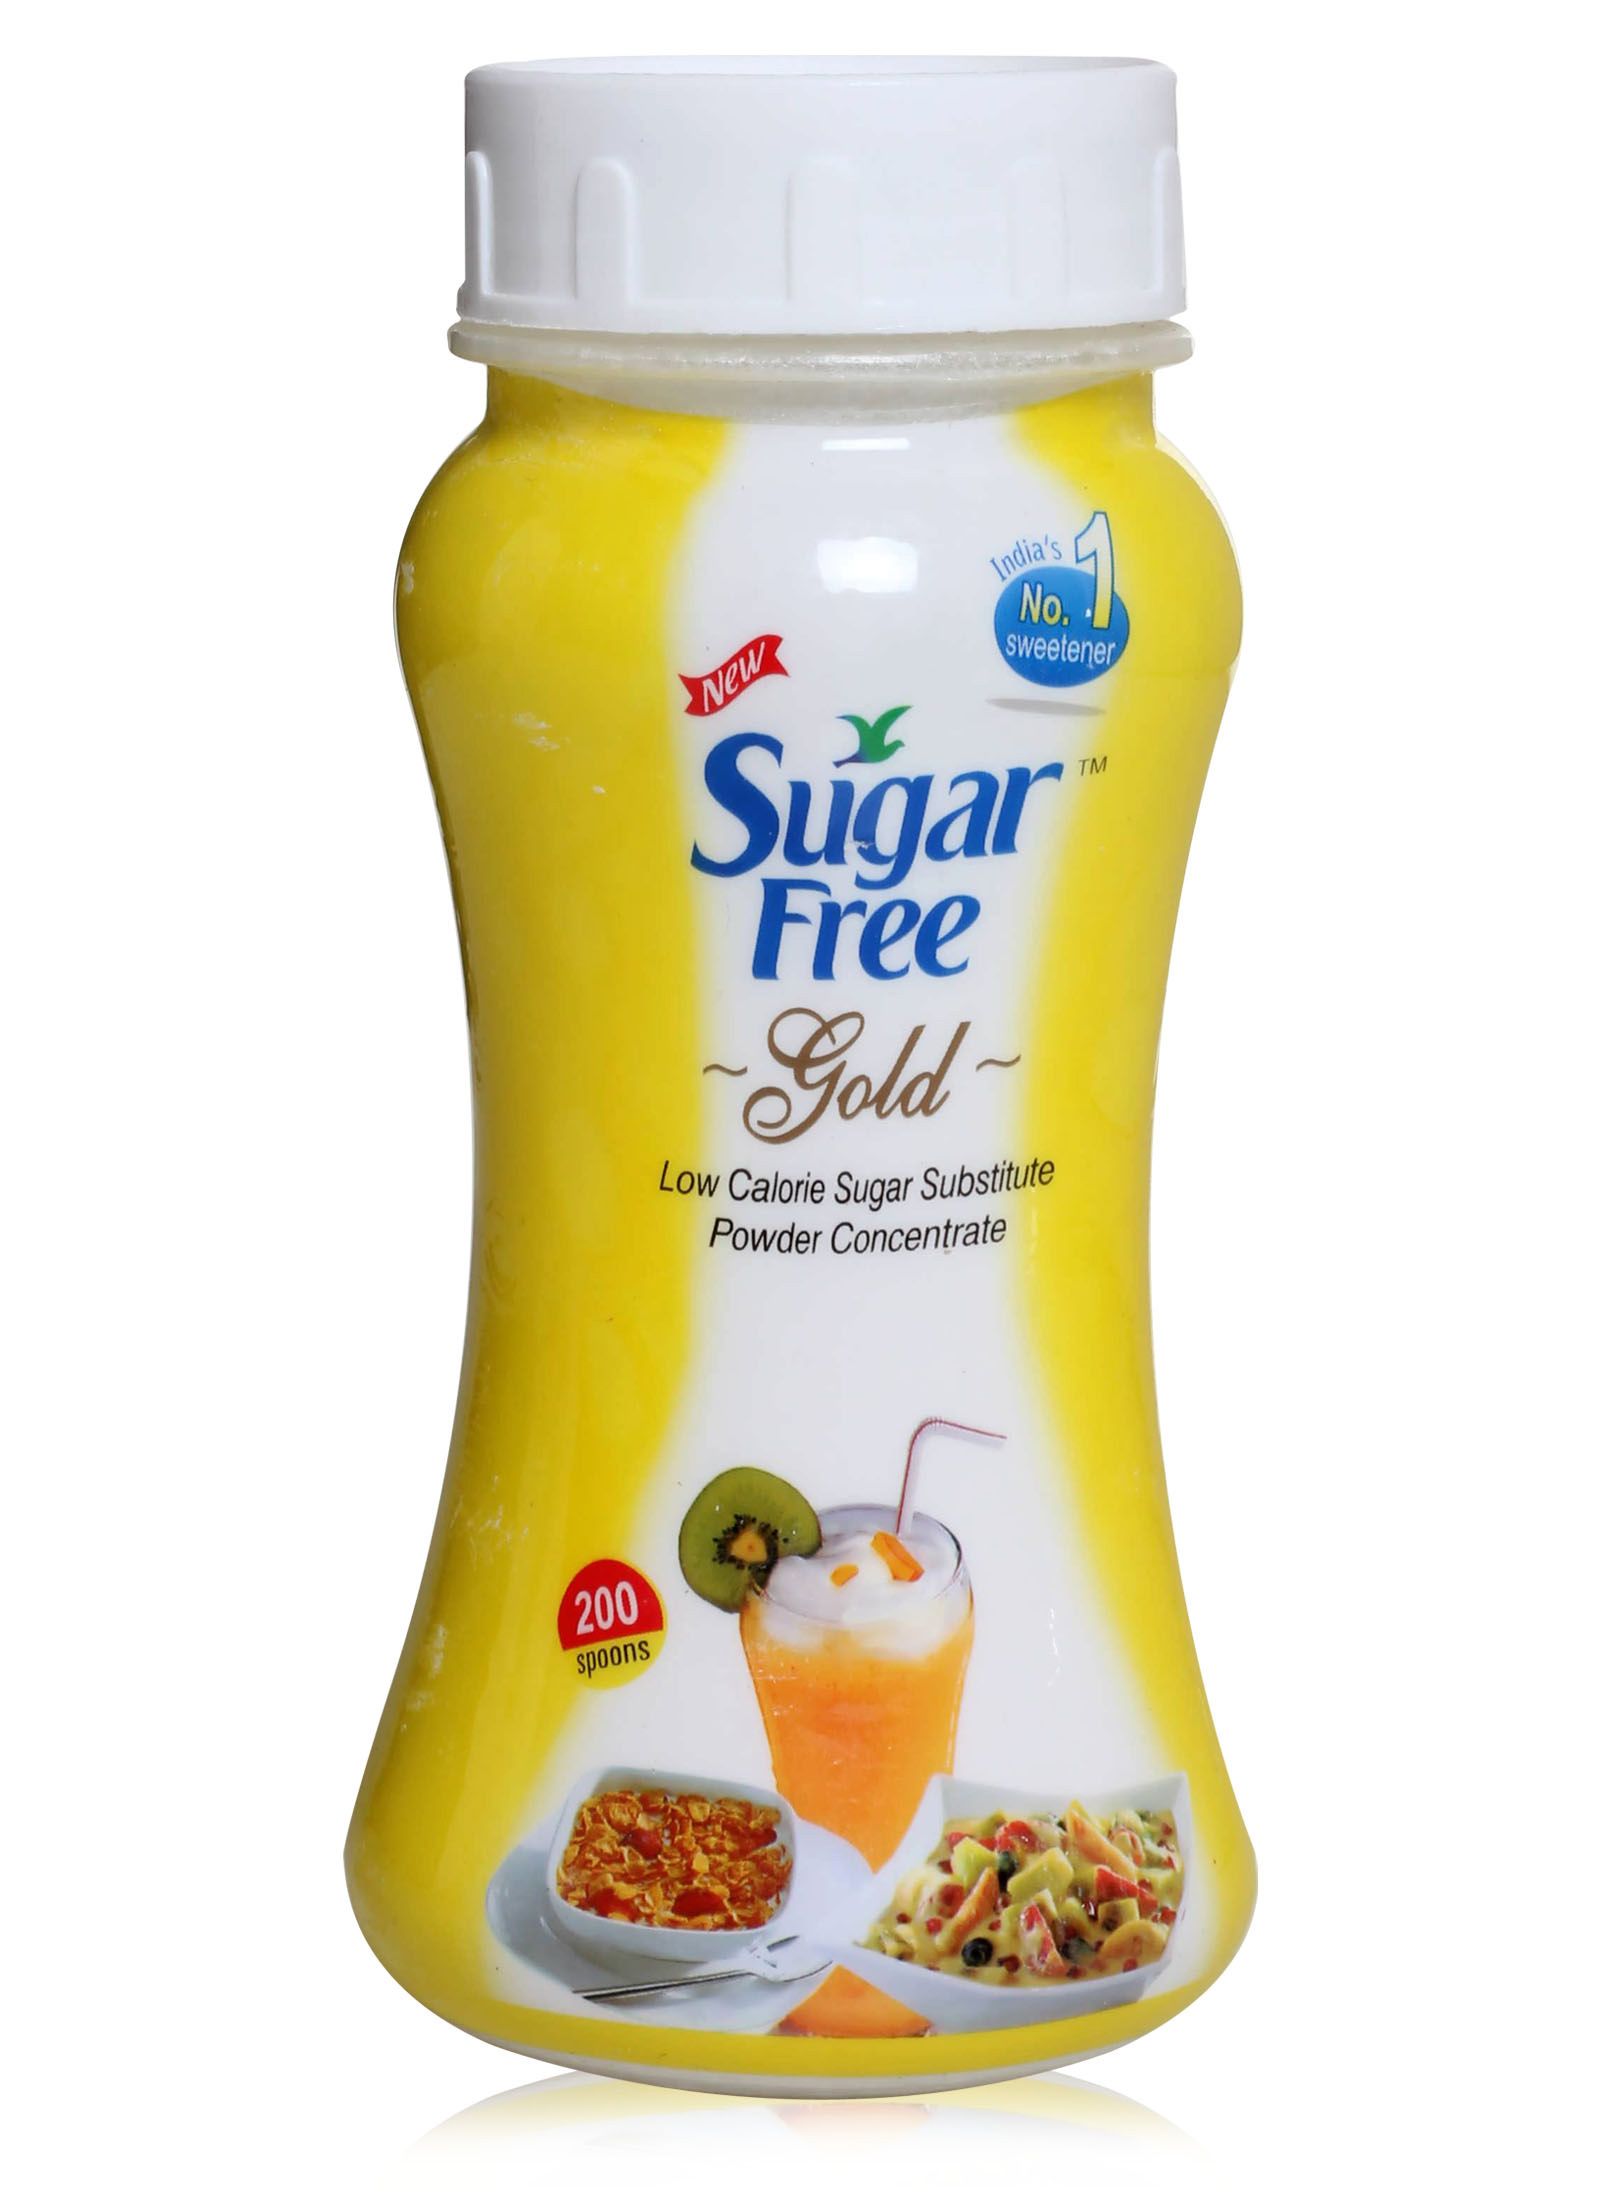 Review: Sugar Free Gold (Tablet)